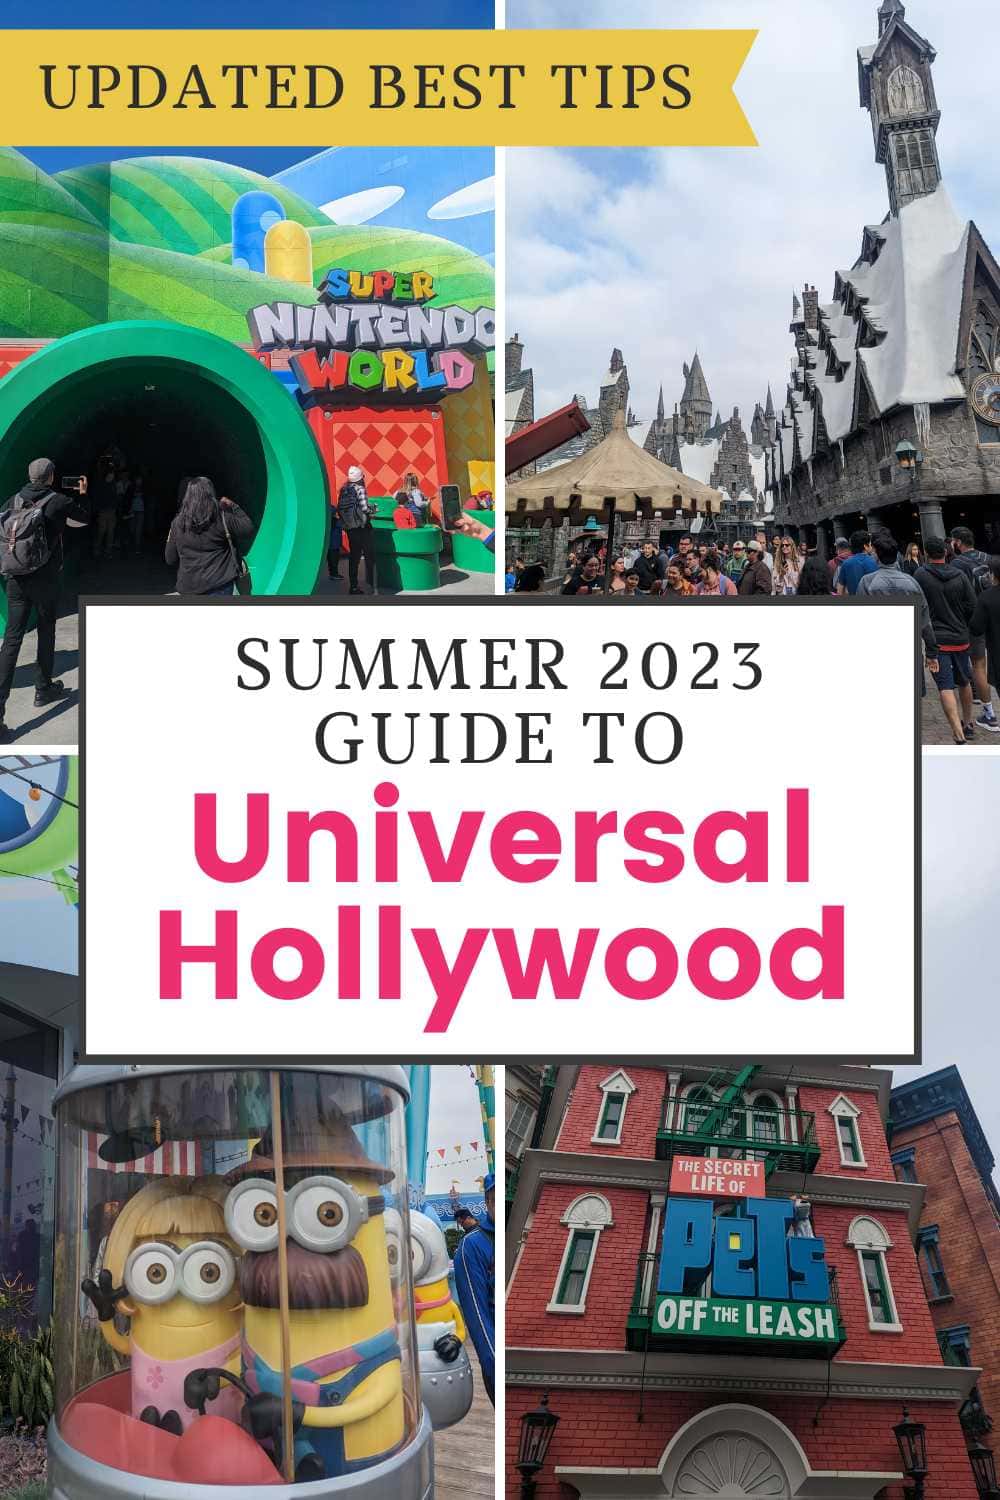 Explore our exclusive tips and tricks for an unforgettable day at Universal Studios Hollywood with your family! Discover the best rides, food, and hidden gems to make the most of your magical adventure! I've got great hacks to prevent motion sickness, hotels nearby and where to stay, Harry Potter and Mario tips too! via @pullingcurls